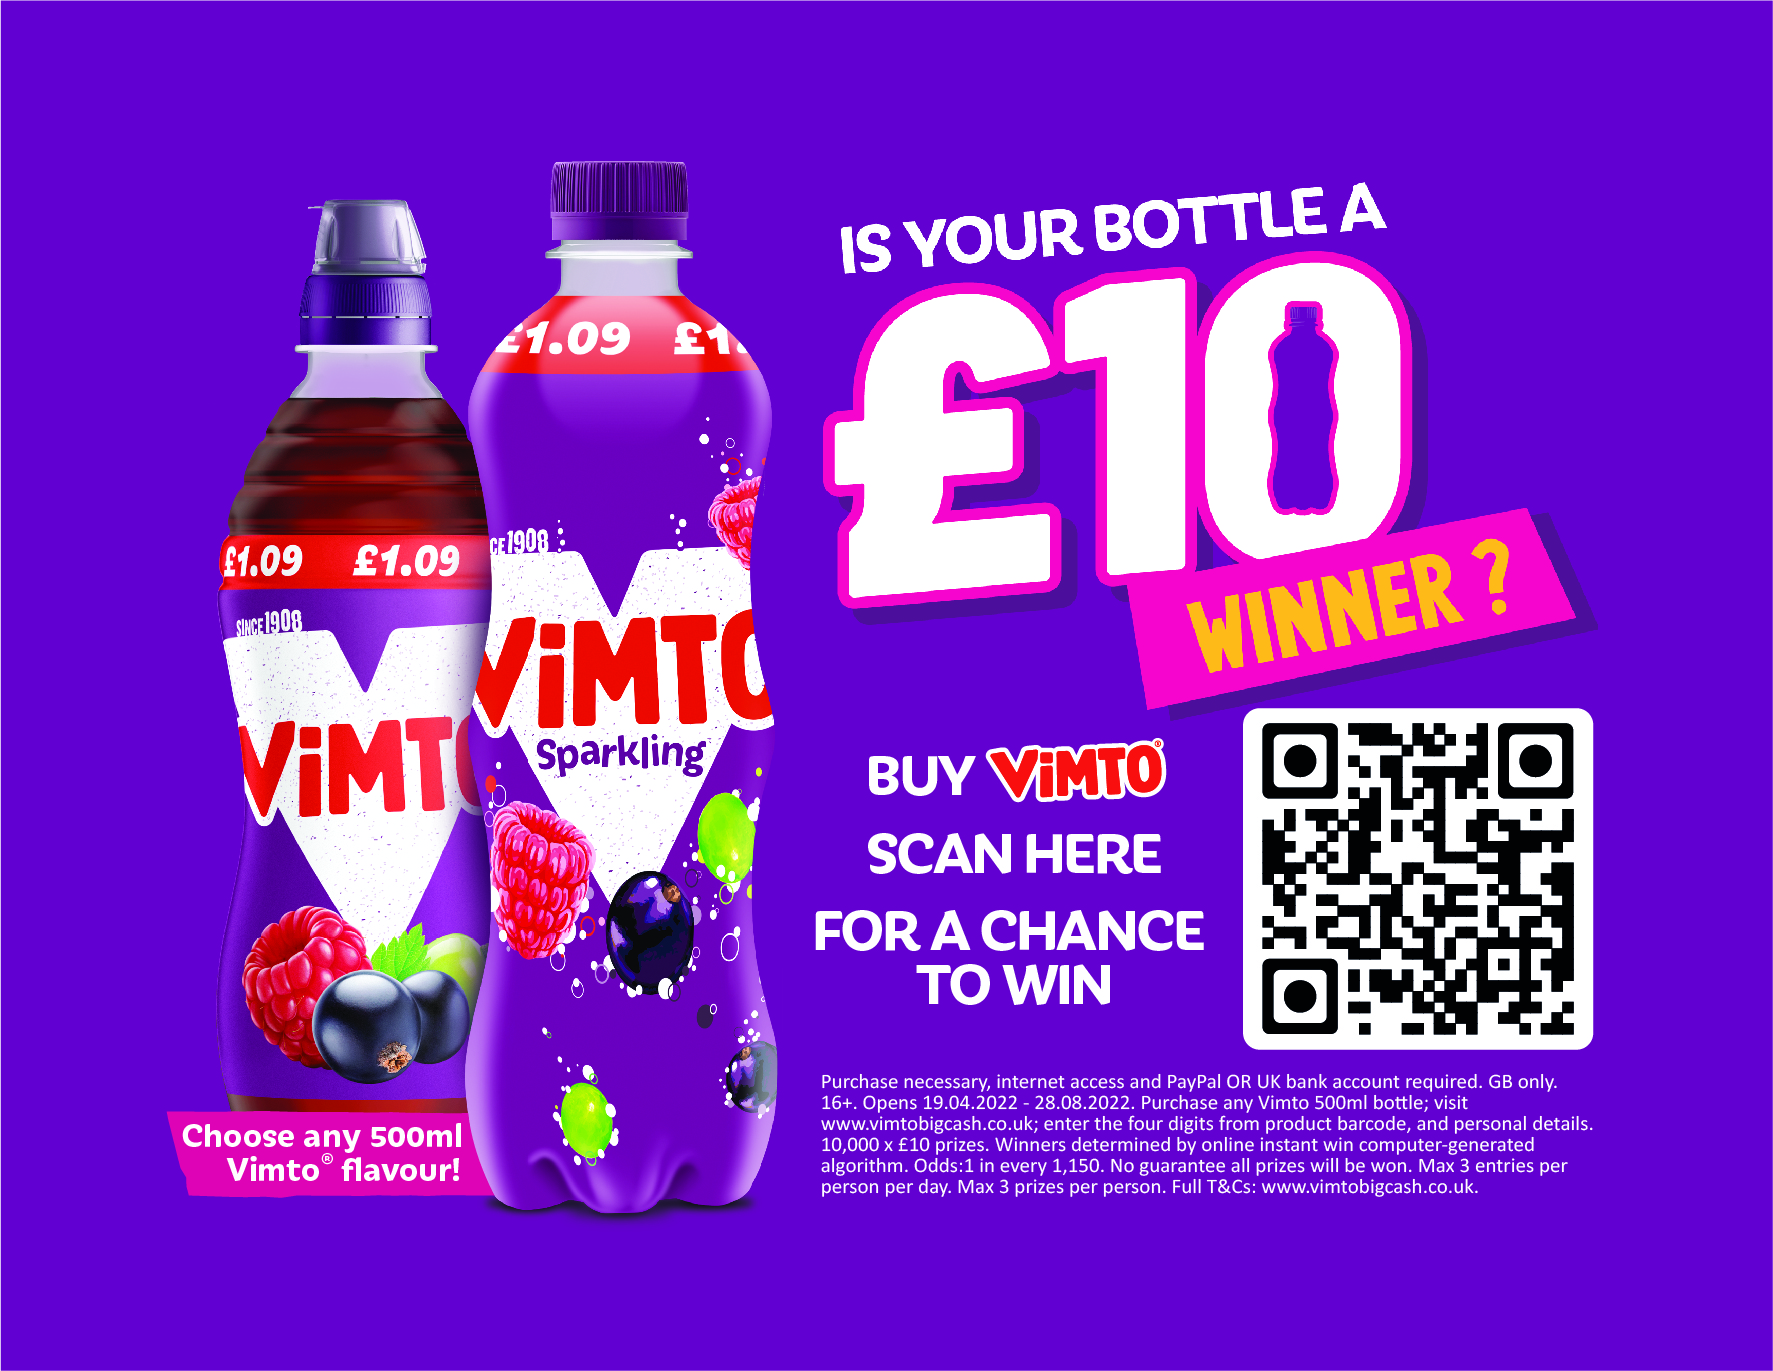 Vimto launches two new flavours and Big Cash Giveaway promotion